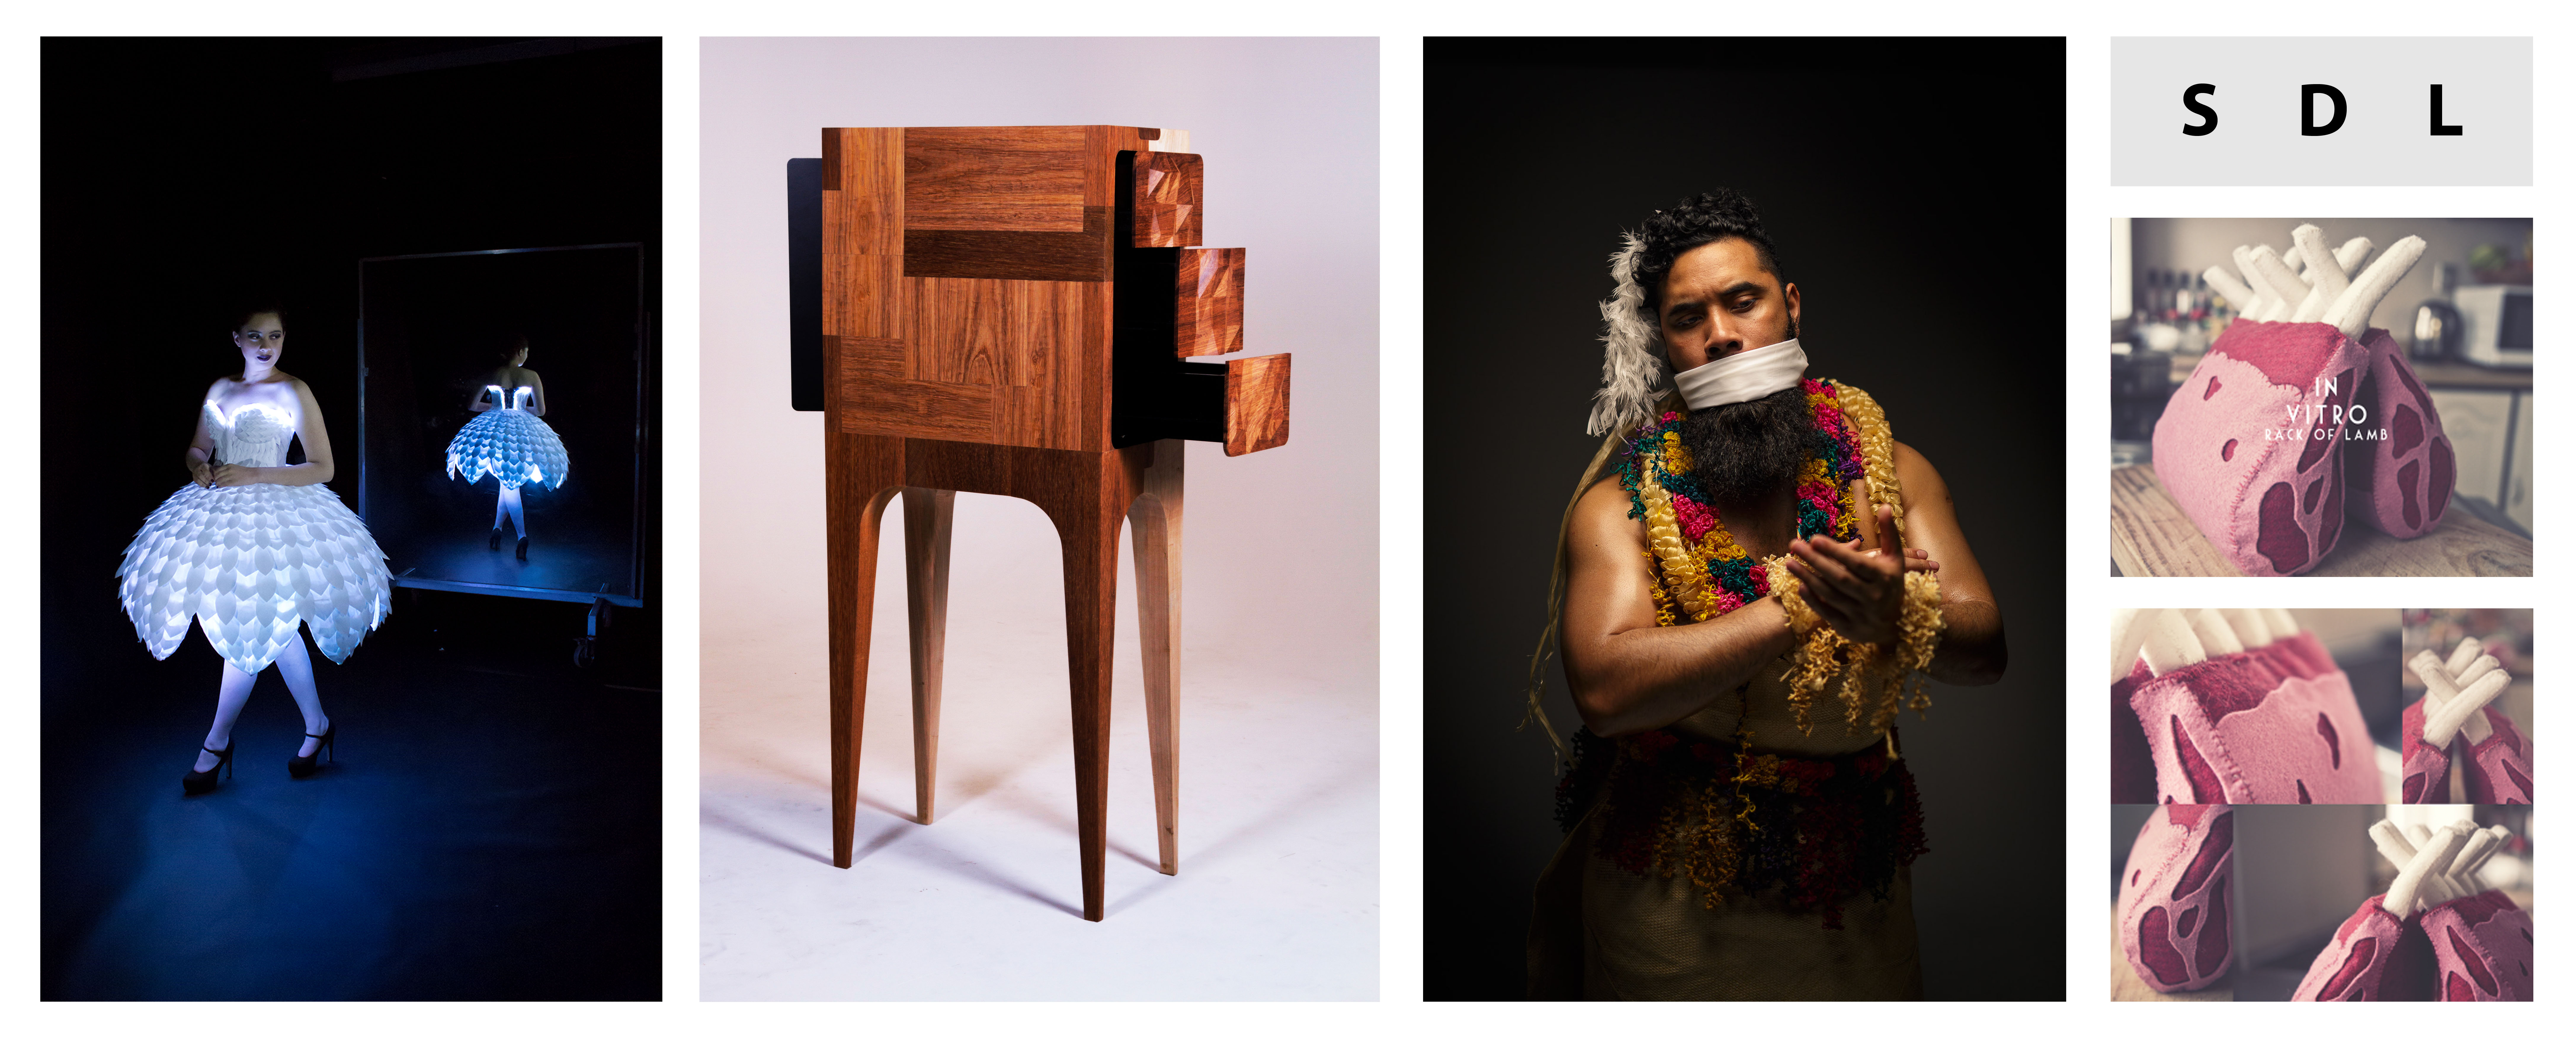 Student work formed in the Social Design Lab, a dress that lights up, a wooden set of drawers, a person dressed in Pacific Island like costume, and a rack of lamb made of soft toy material